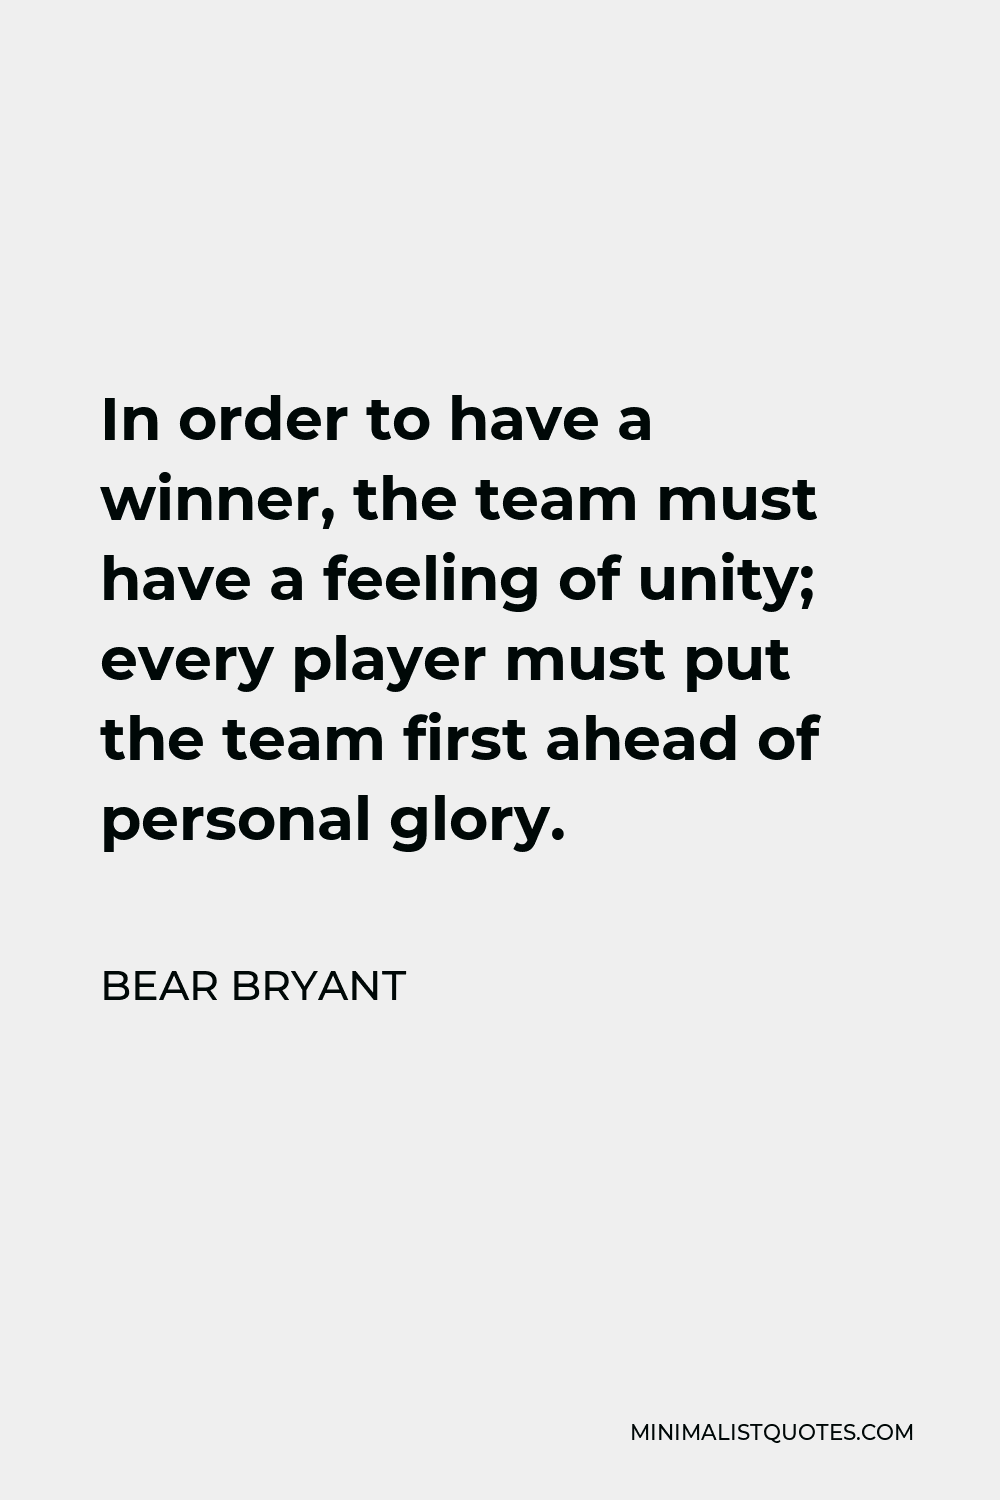 Bear Bryant Quote - In order to have a winner, the team must have a feeling of unity; every player must put the team first ahead of personal glory.